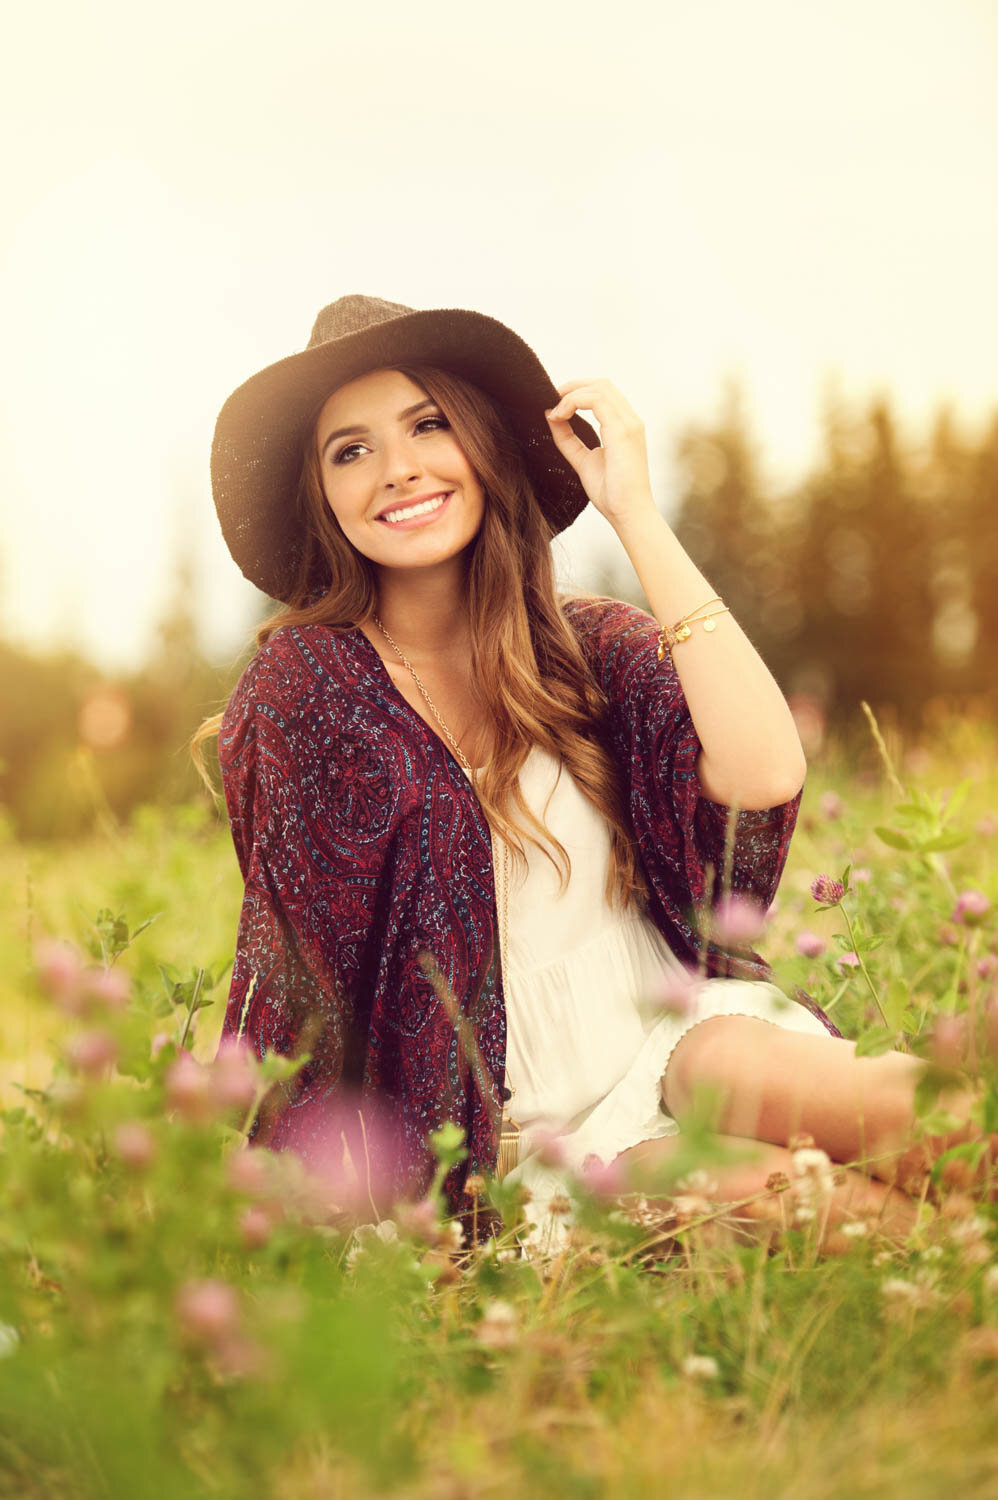 girl in blooming field with sun hat and patterned jacket